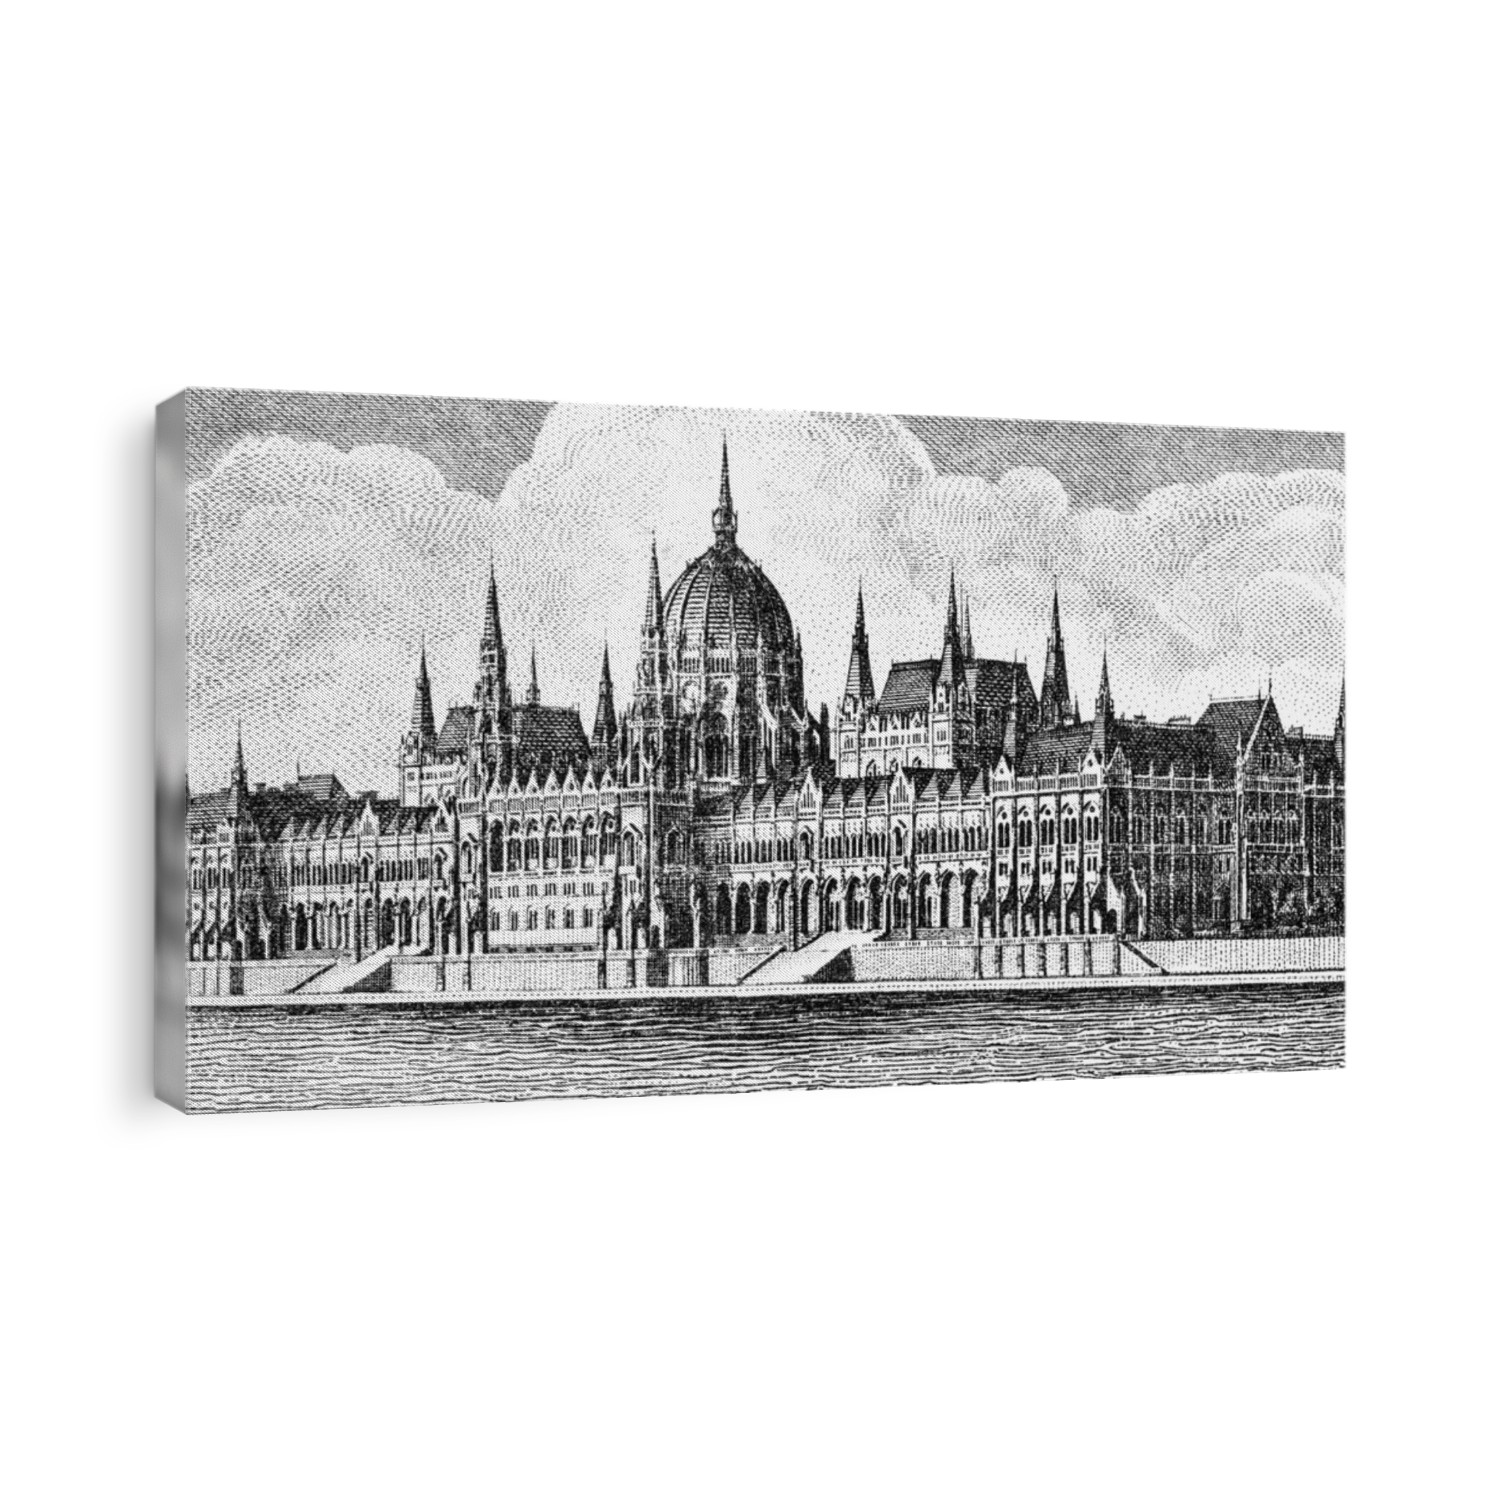 Orszaghaz - Hungarian Parliament building in Budapest. Portrait from Hungary 100 Million Pengo 1946  Banknotes. 